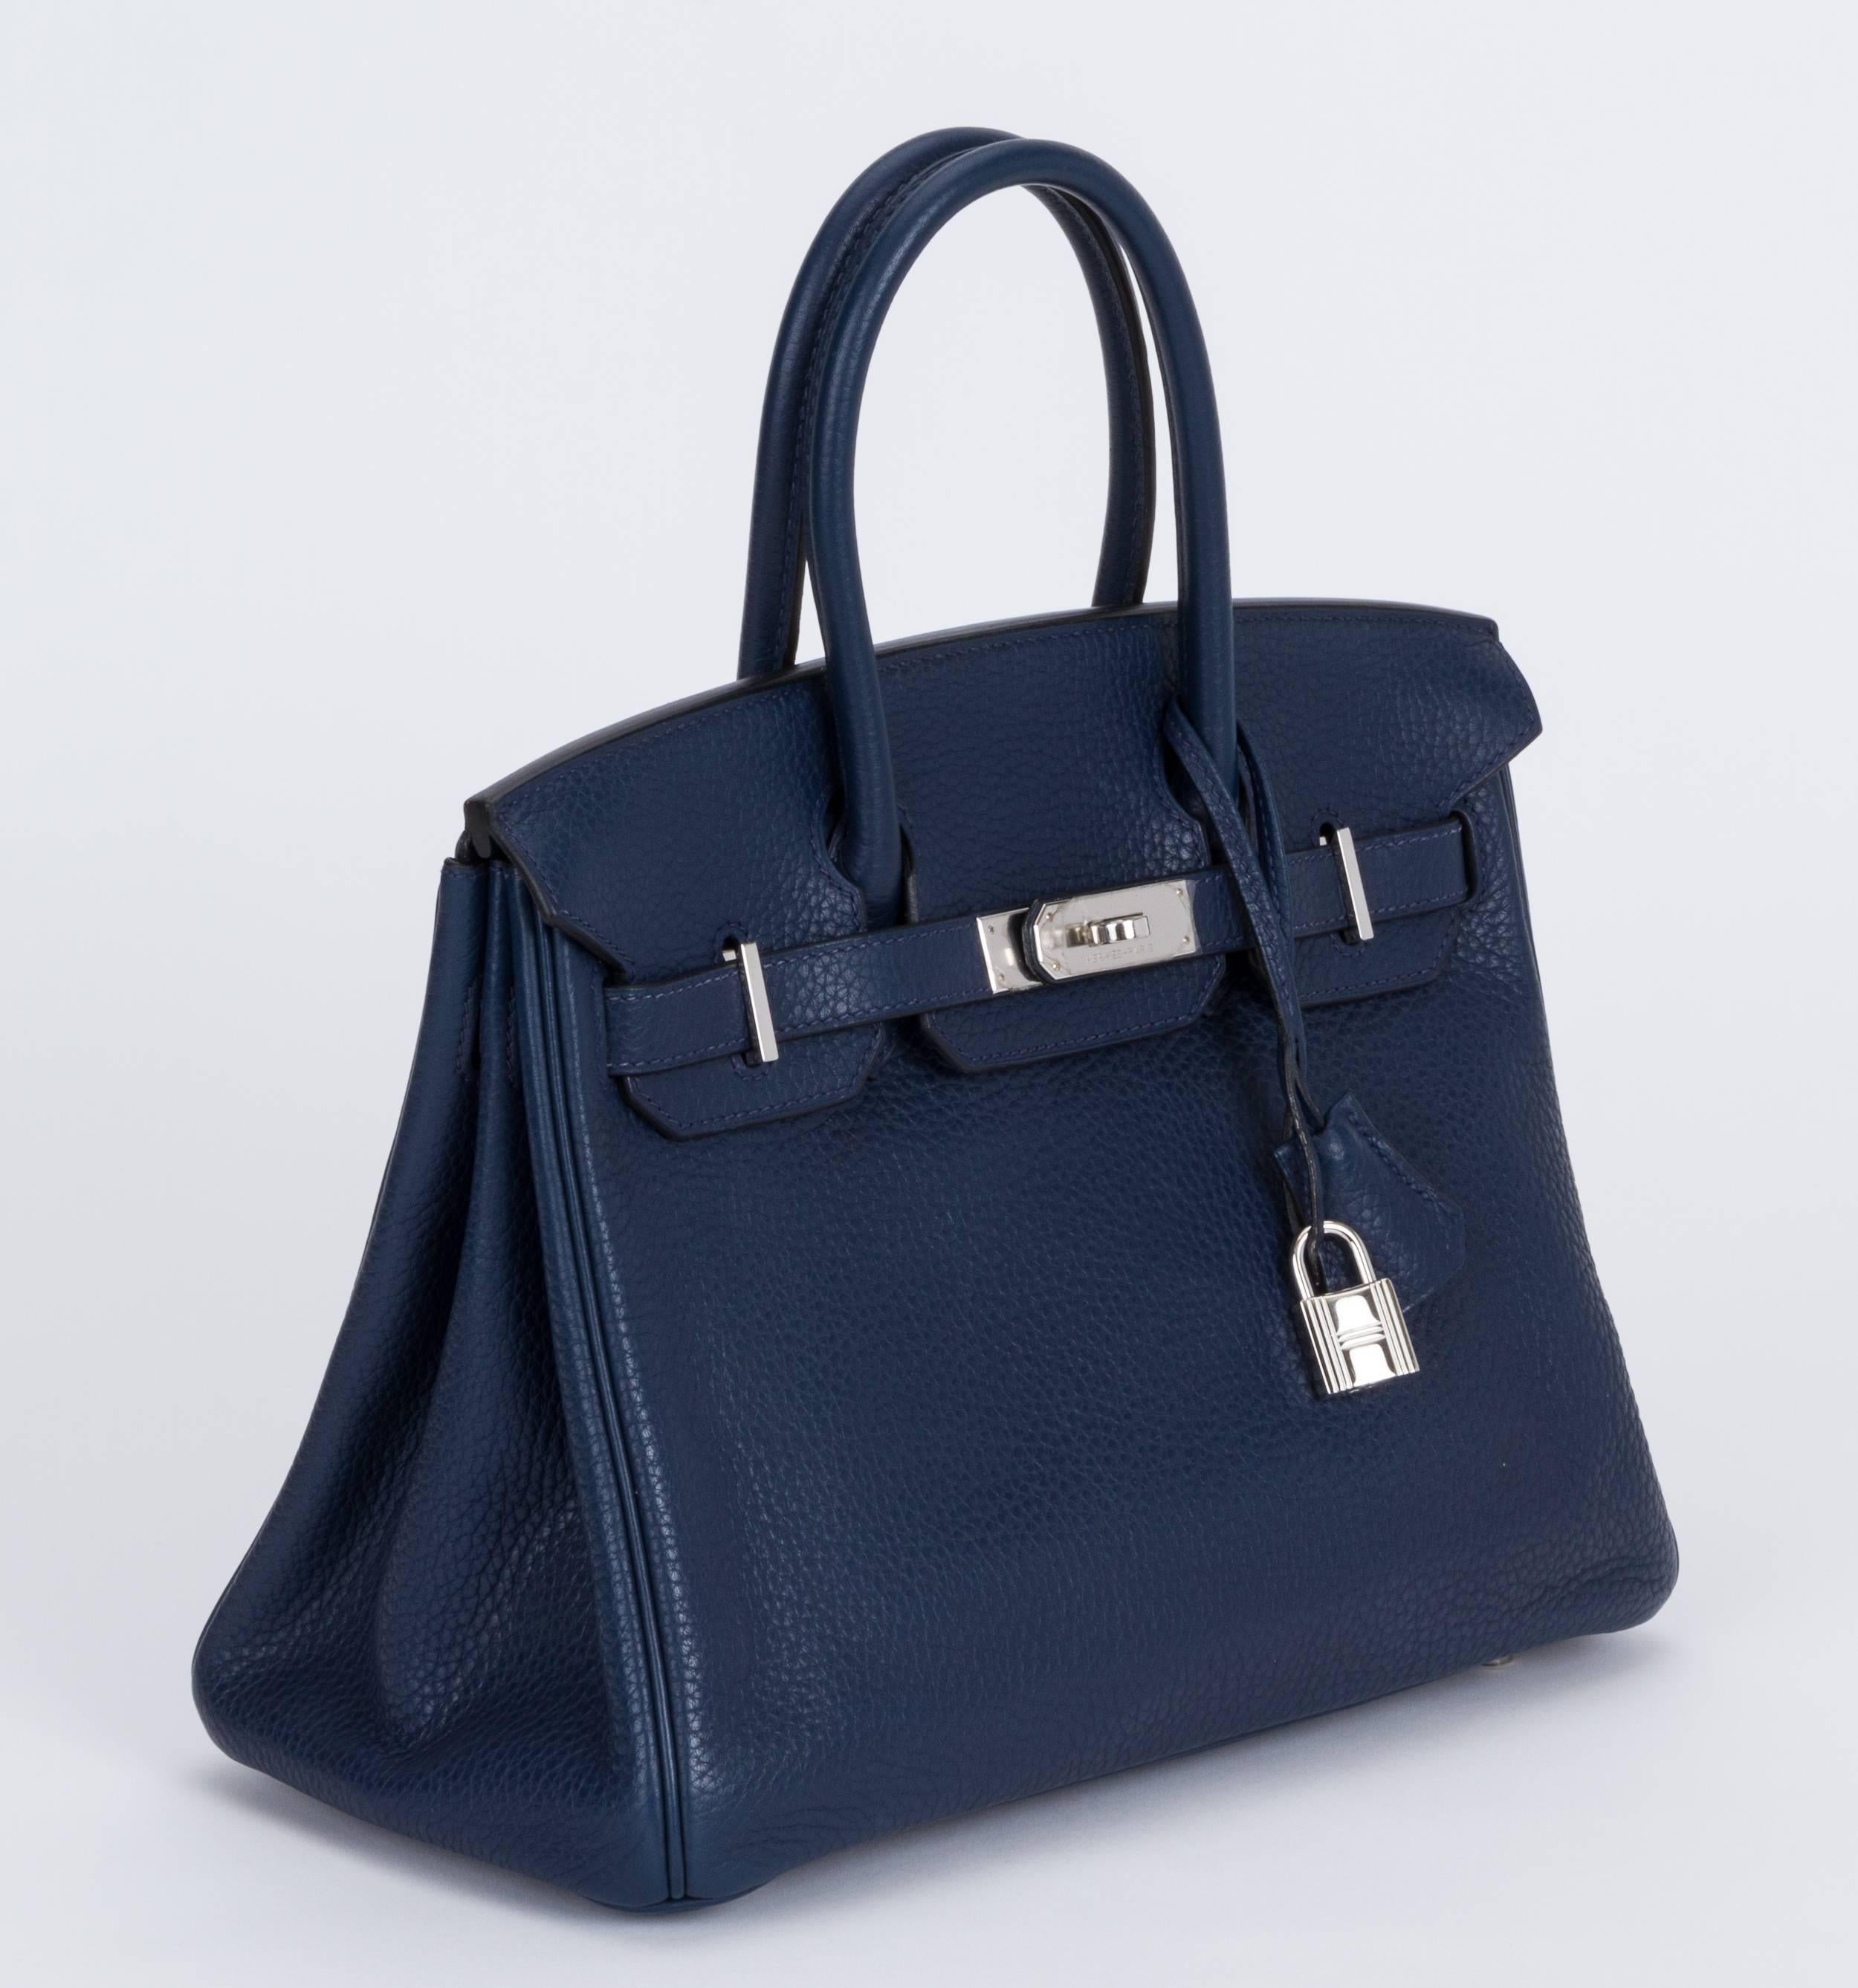 Hermès 30cm Birkin bag in blue abyss clemence leather and palladium hardware. Handle drop, 3